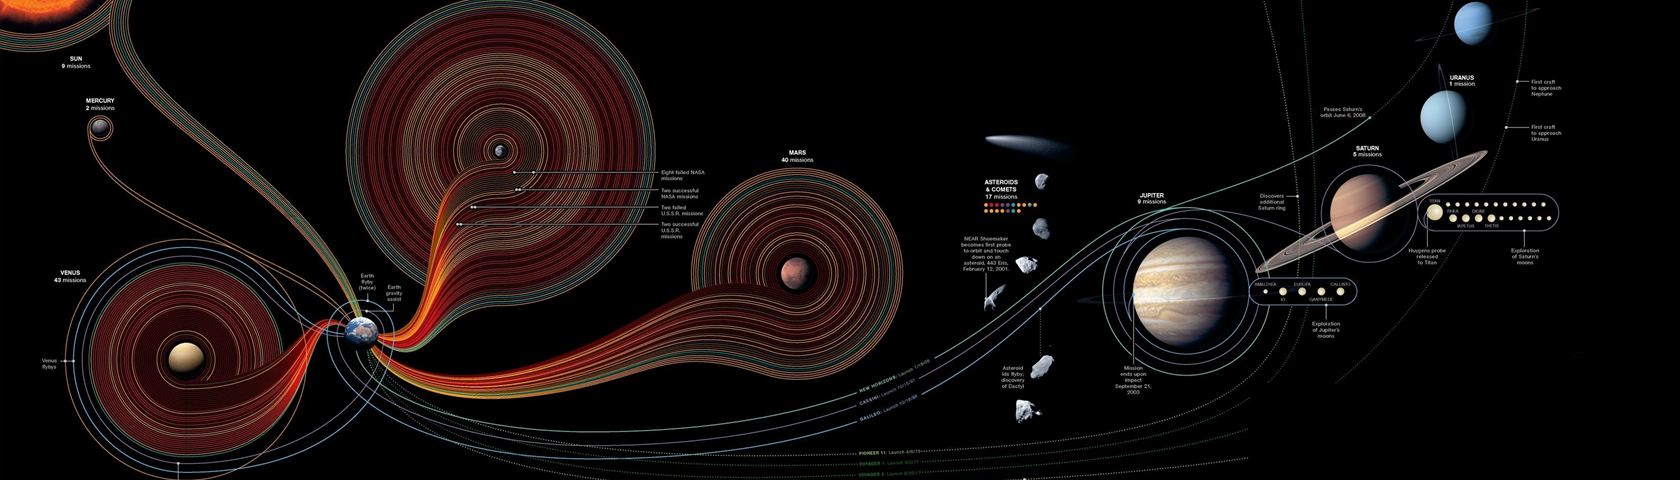 50 Years of Space Exploration